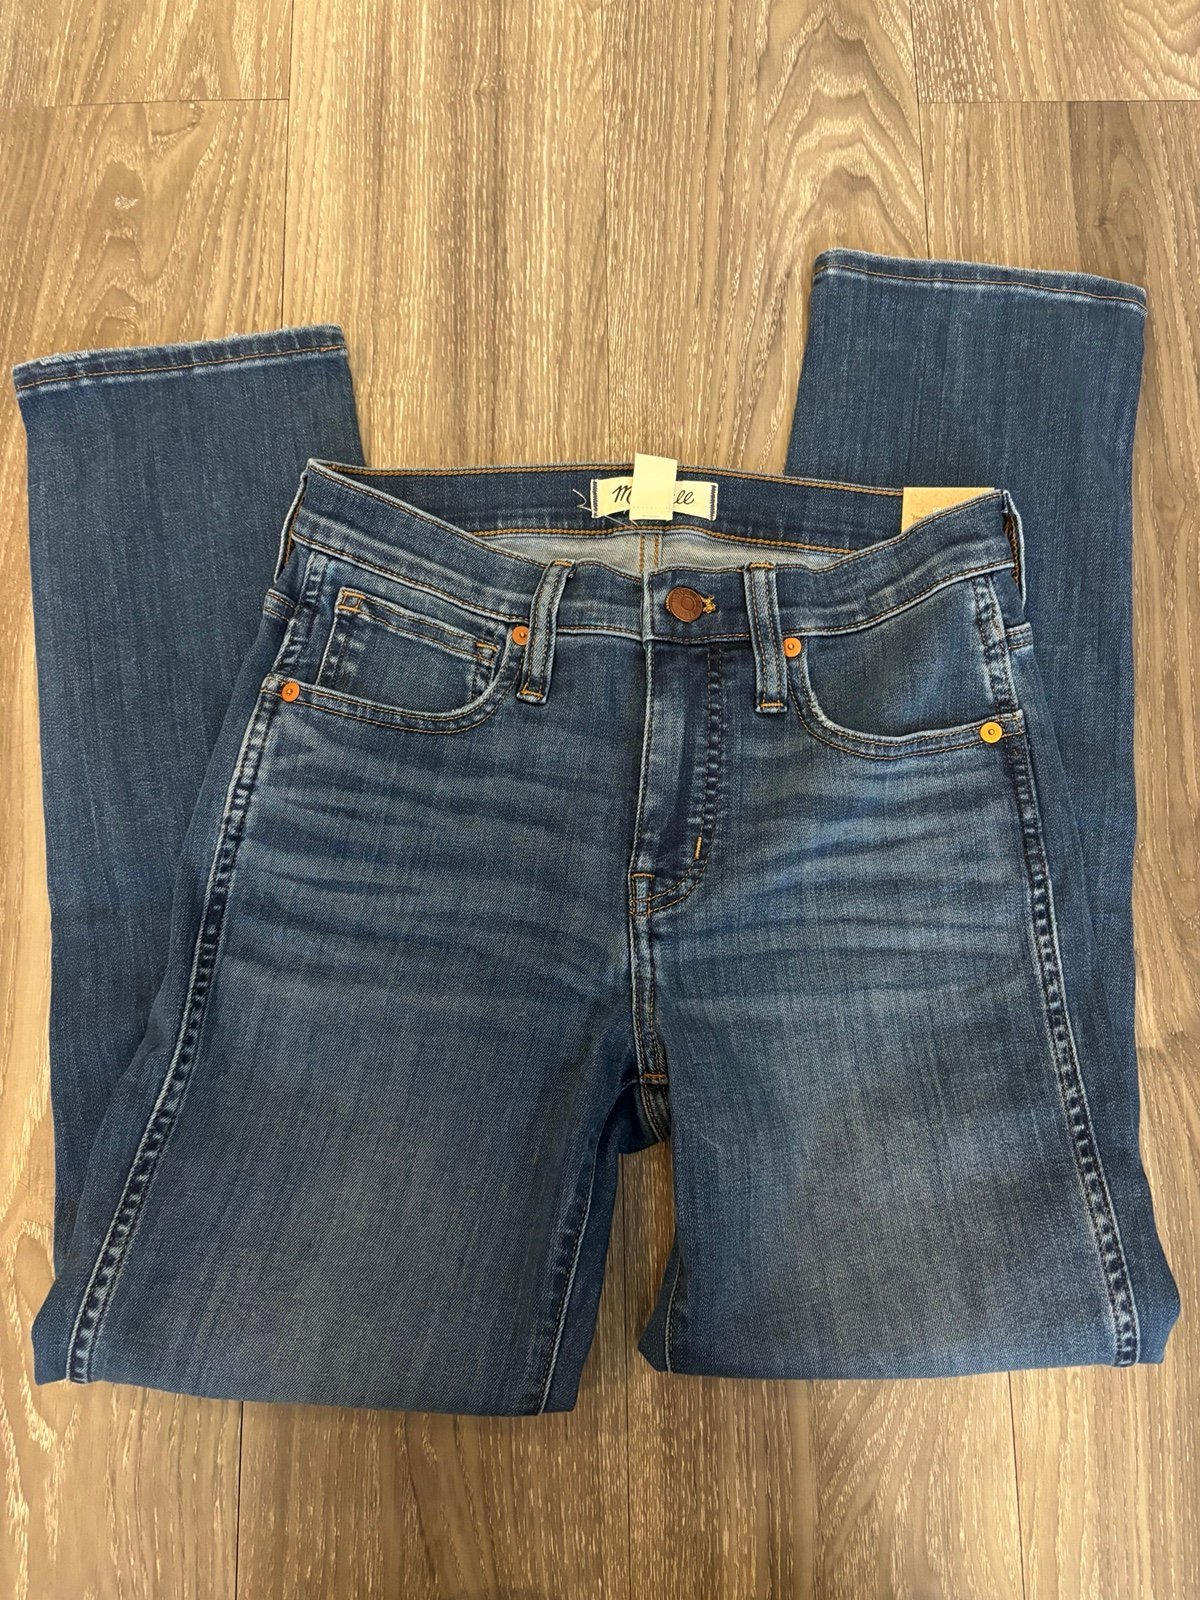 Simple NWT Madewell mid rise stovepipe Jean 25 GJS3QwDCF Factory Price